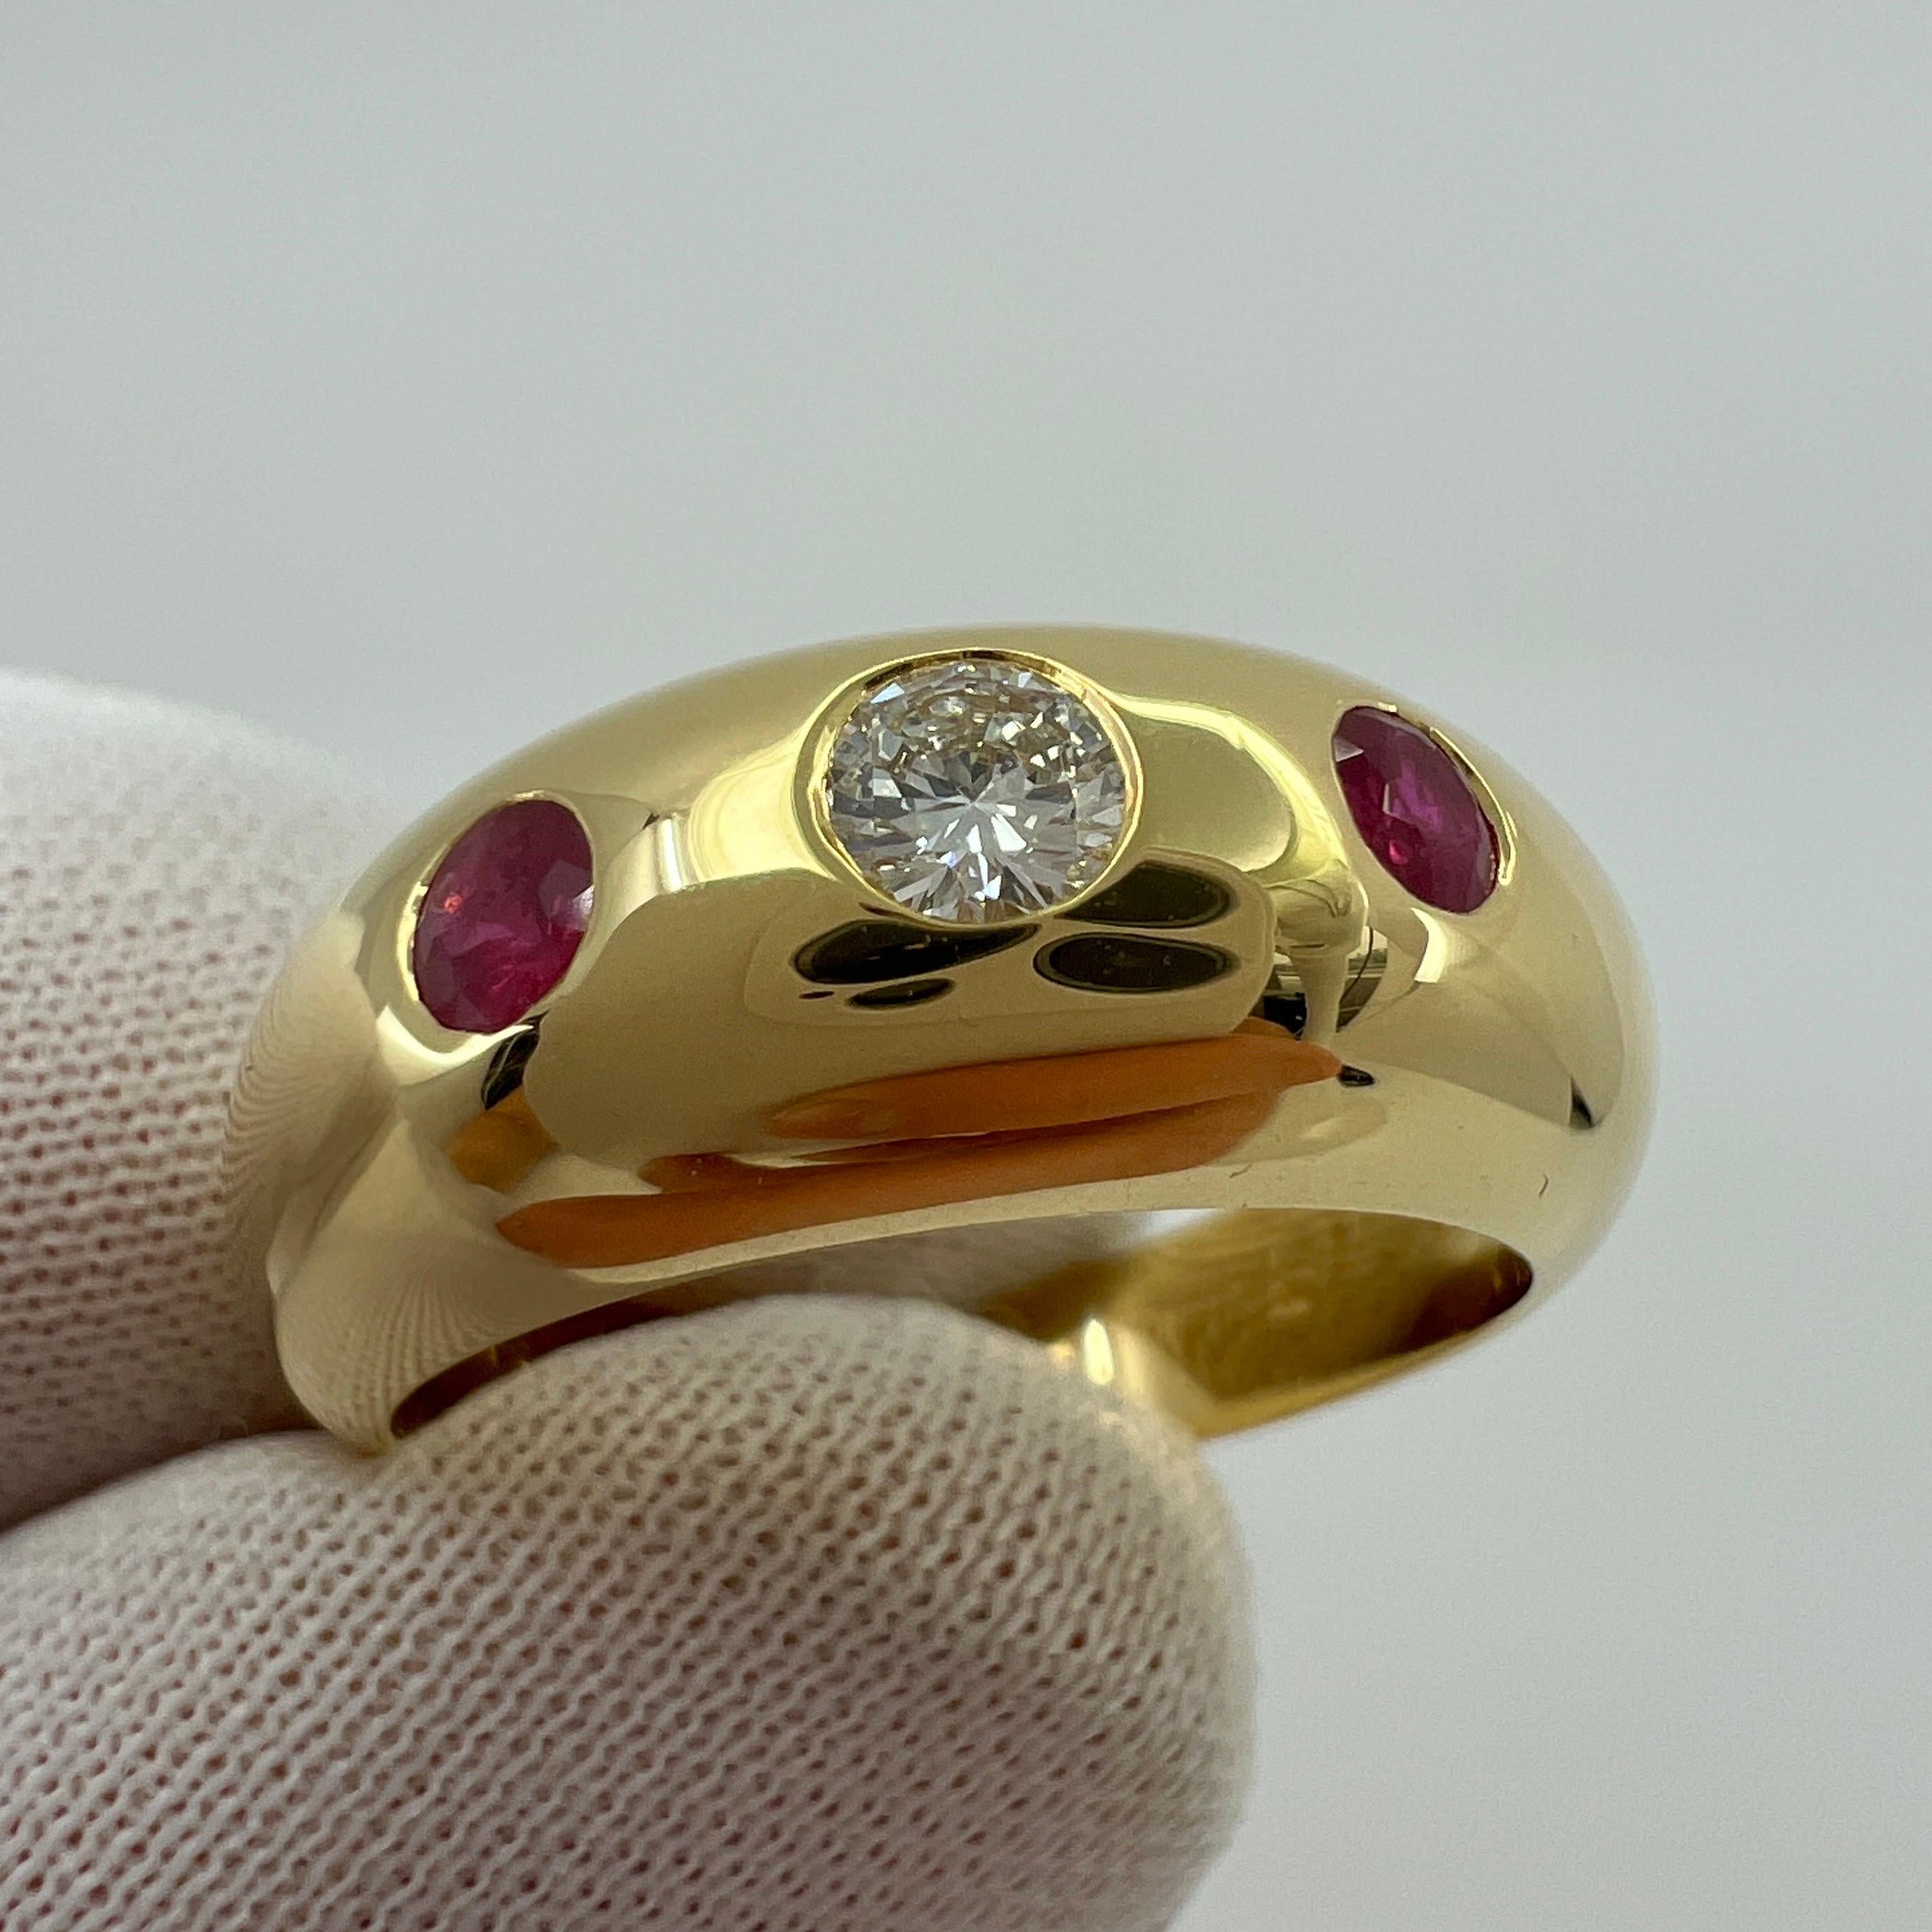 Vintage Cartier Diamond Ruby Daphne 18k Yellow Gold Three Stone Domed Ring EU51 In Excellent Condition For Sale In Birmingham, GB